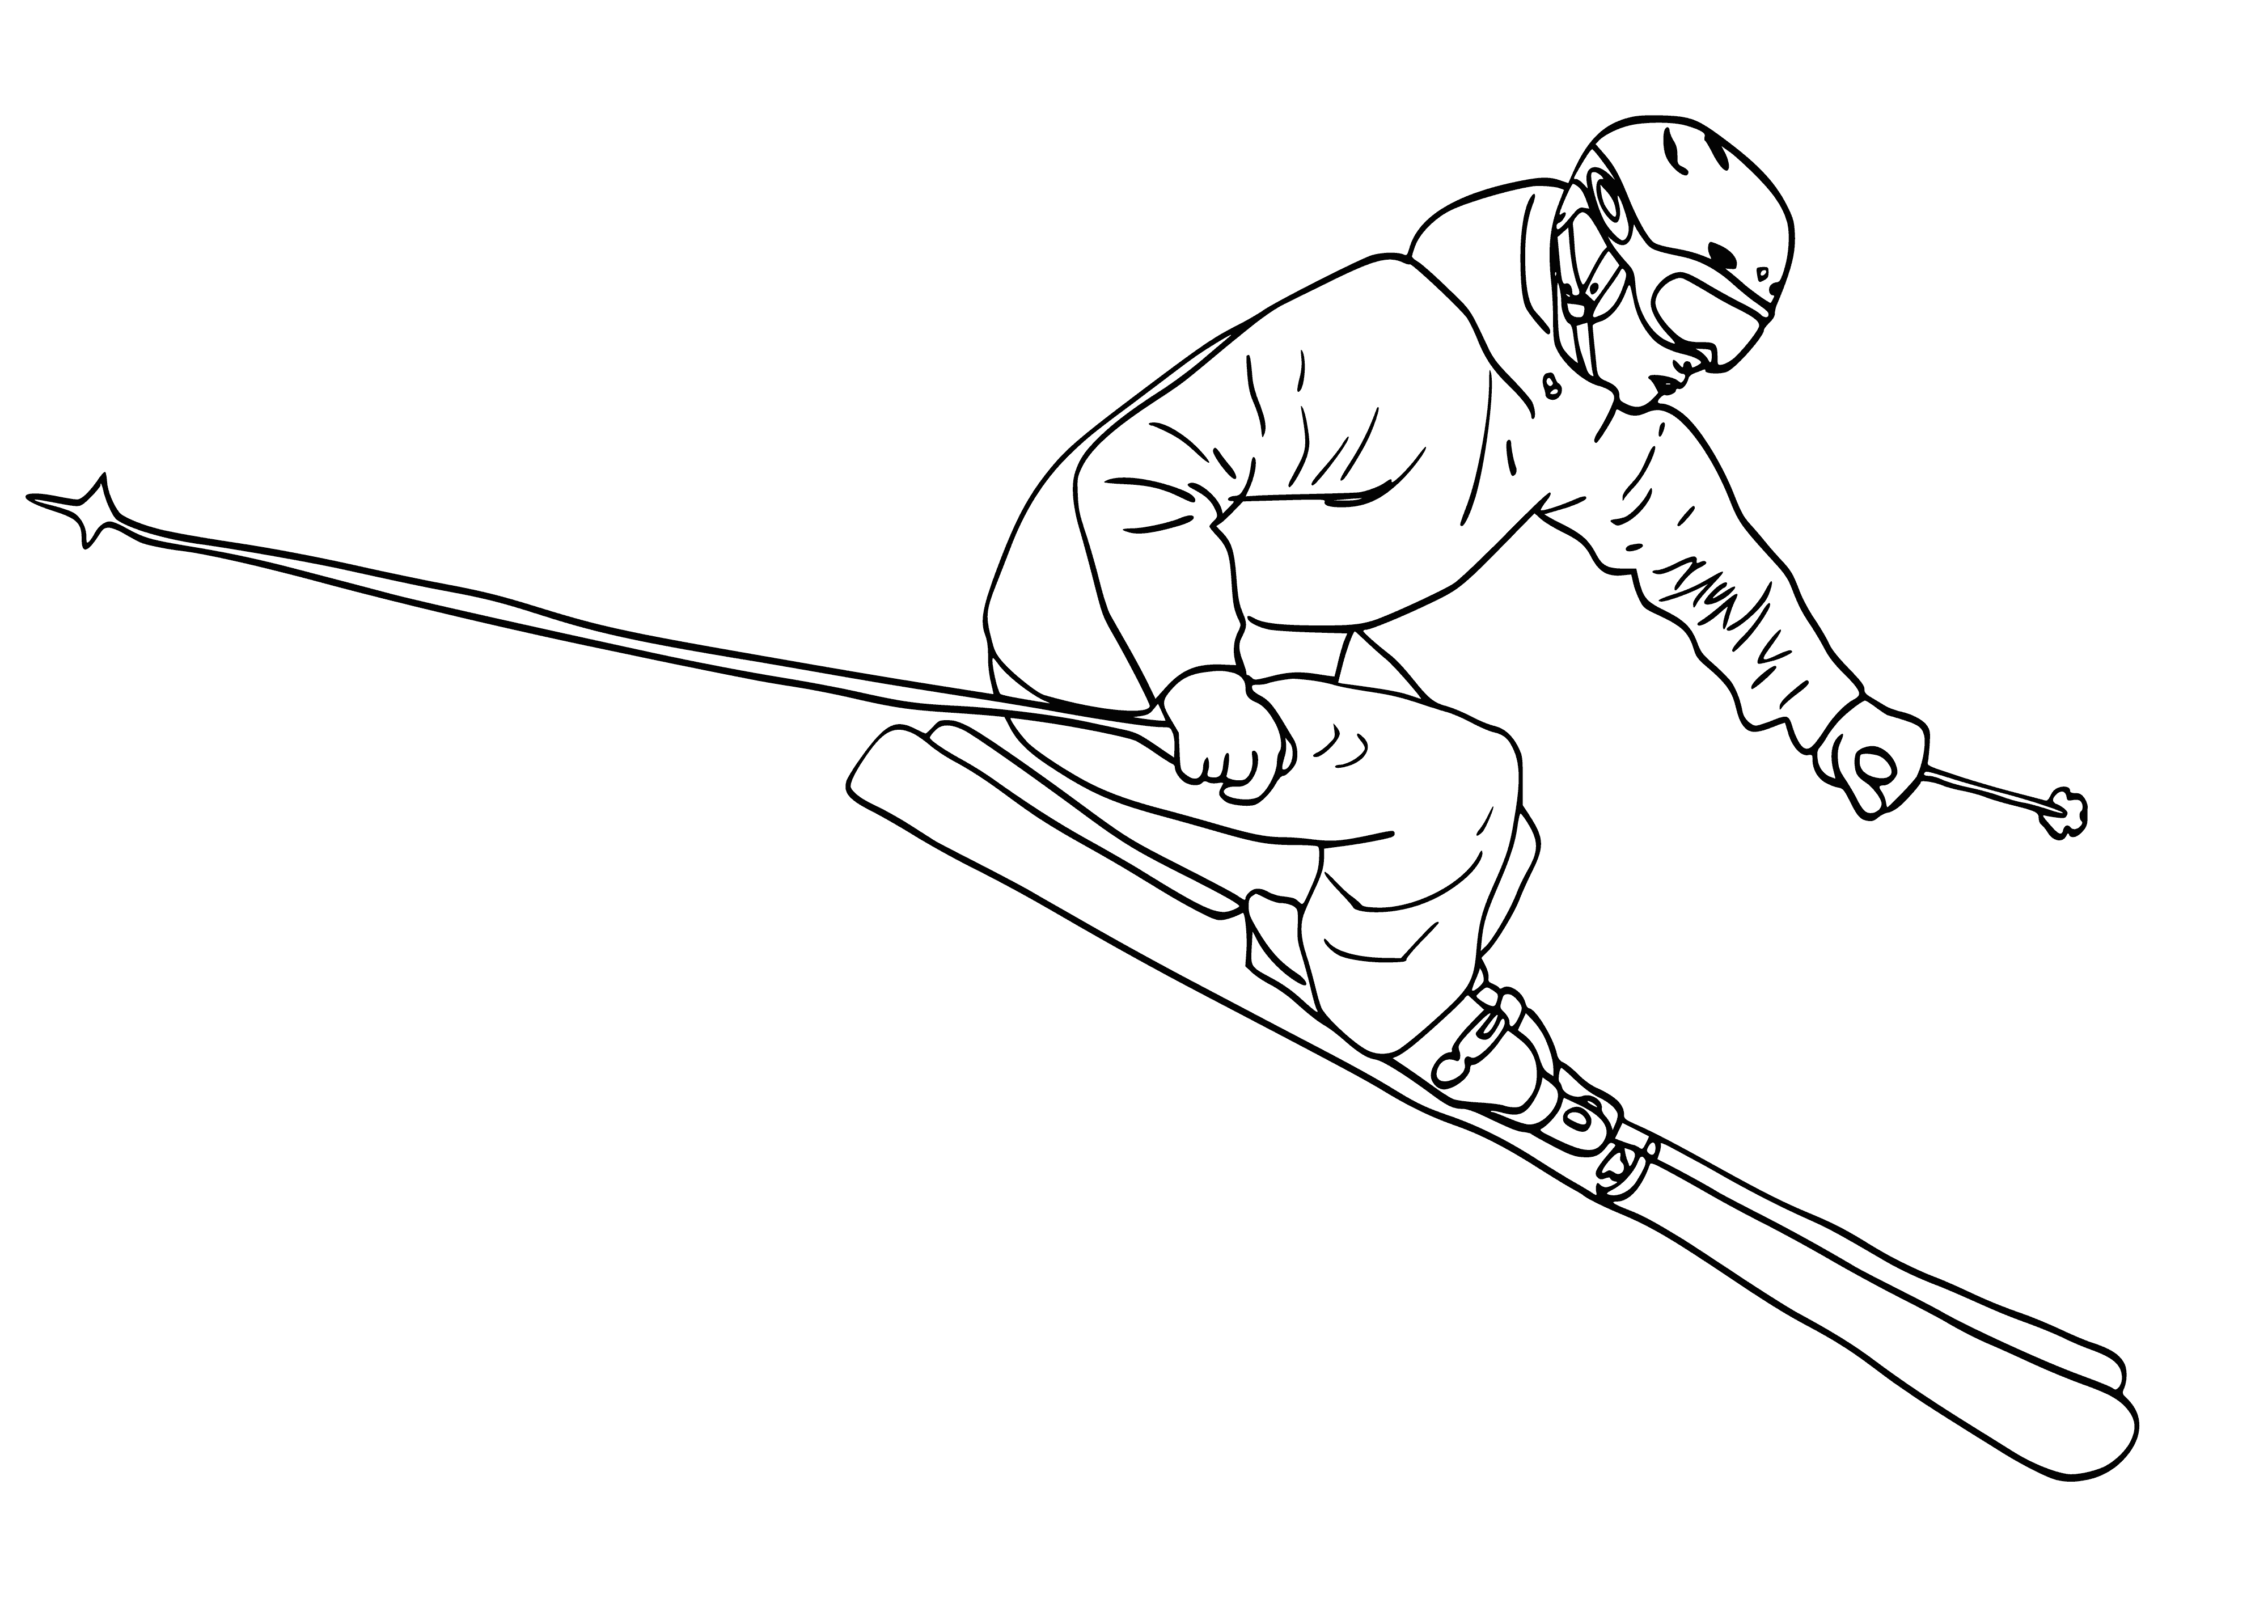 coloring page: Skiers ski down a hill on fresh powdery snow, clad in brightly-colored jackets & pants, with skis on their feet on a bright blue sky.